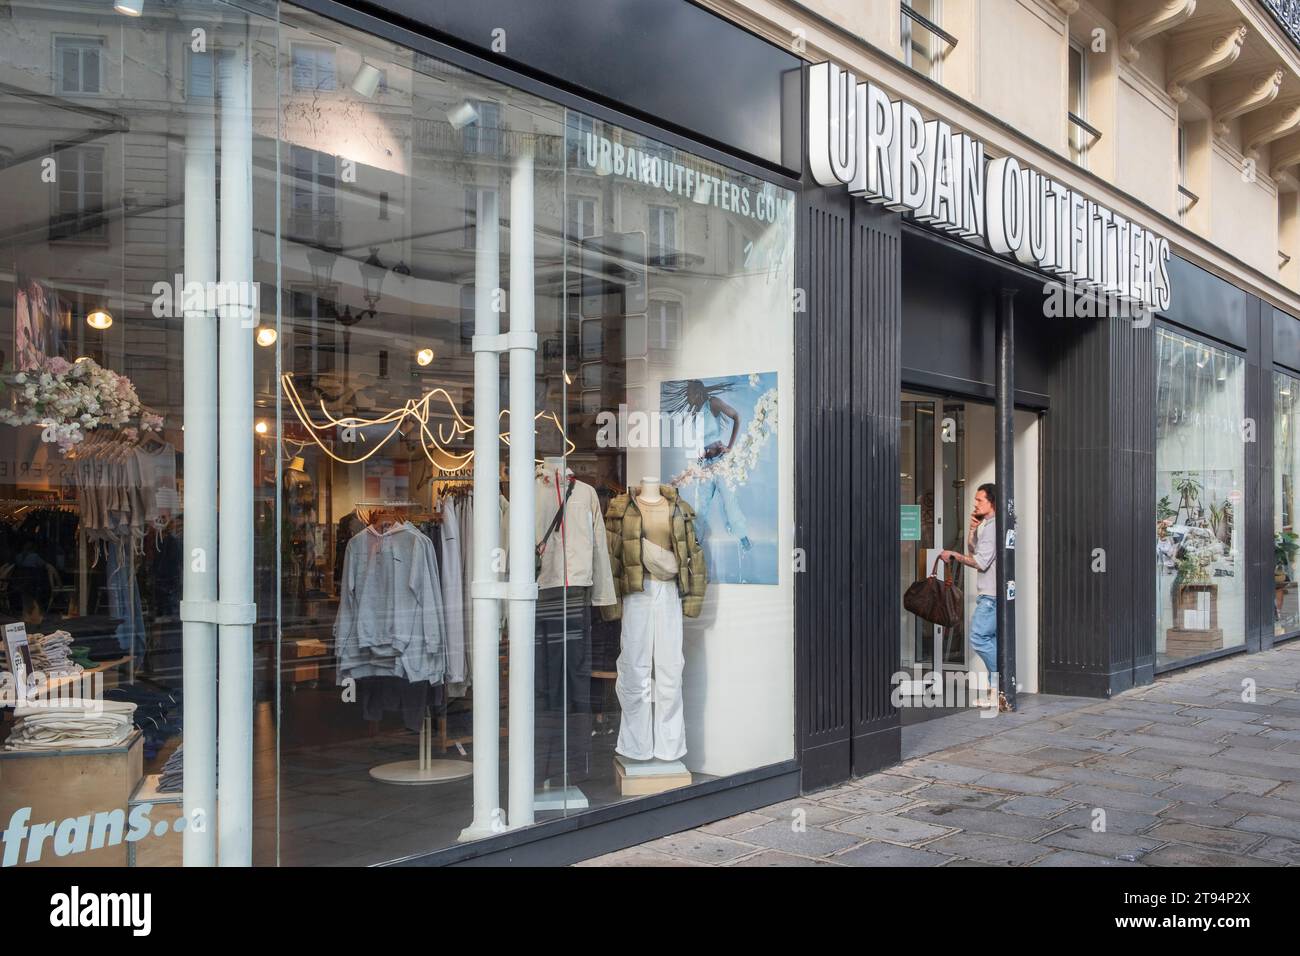 Urban Outfitters shop on Rue de Rivoli in Paris. Urban Outfitters,  is a multinational lifestyle retail company headquartered in Philadelpha Stock Photo